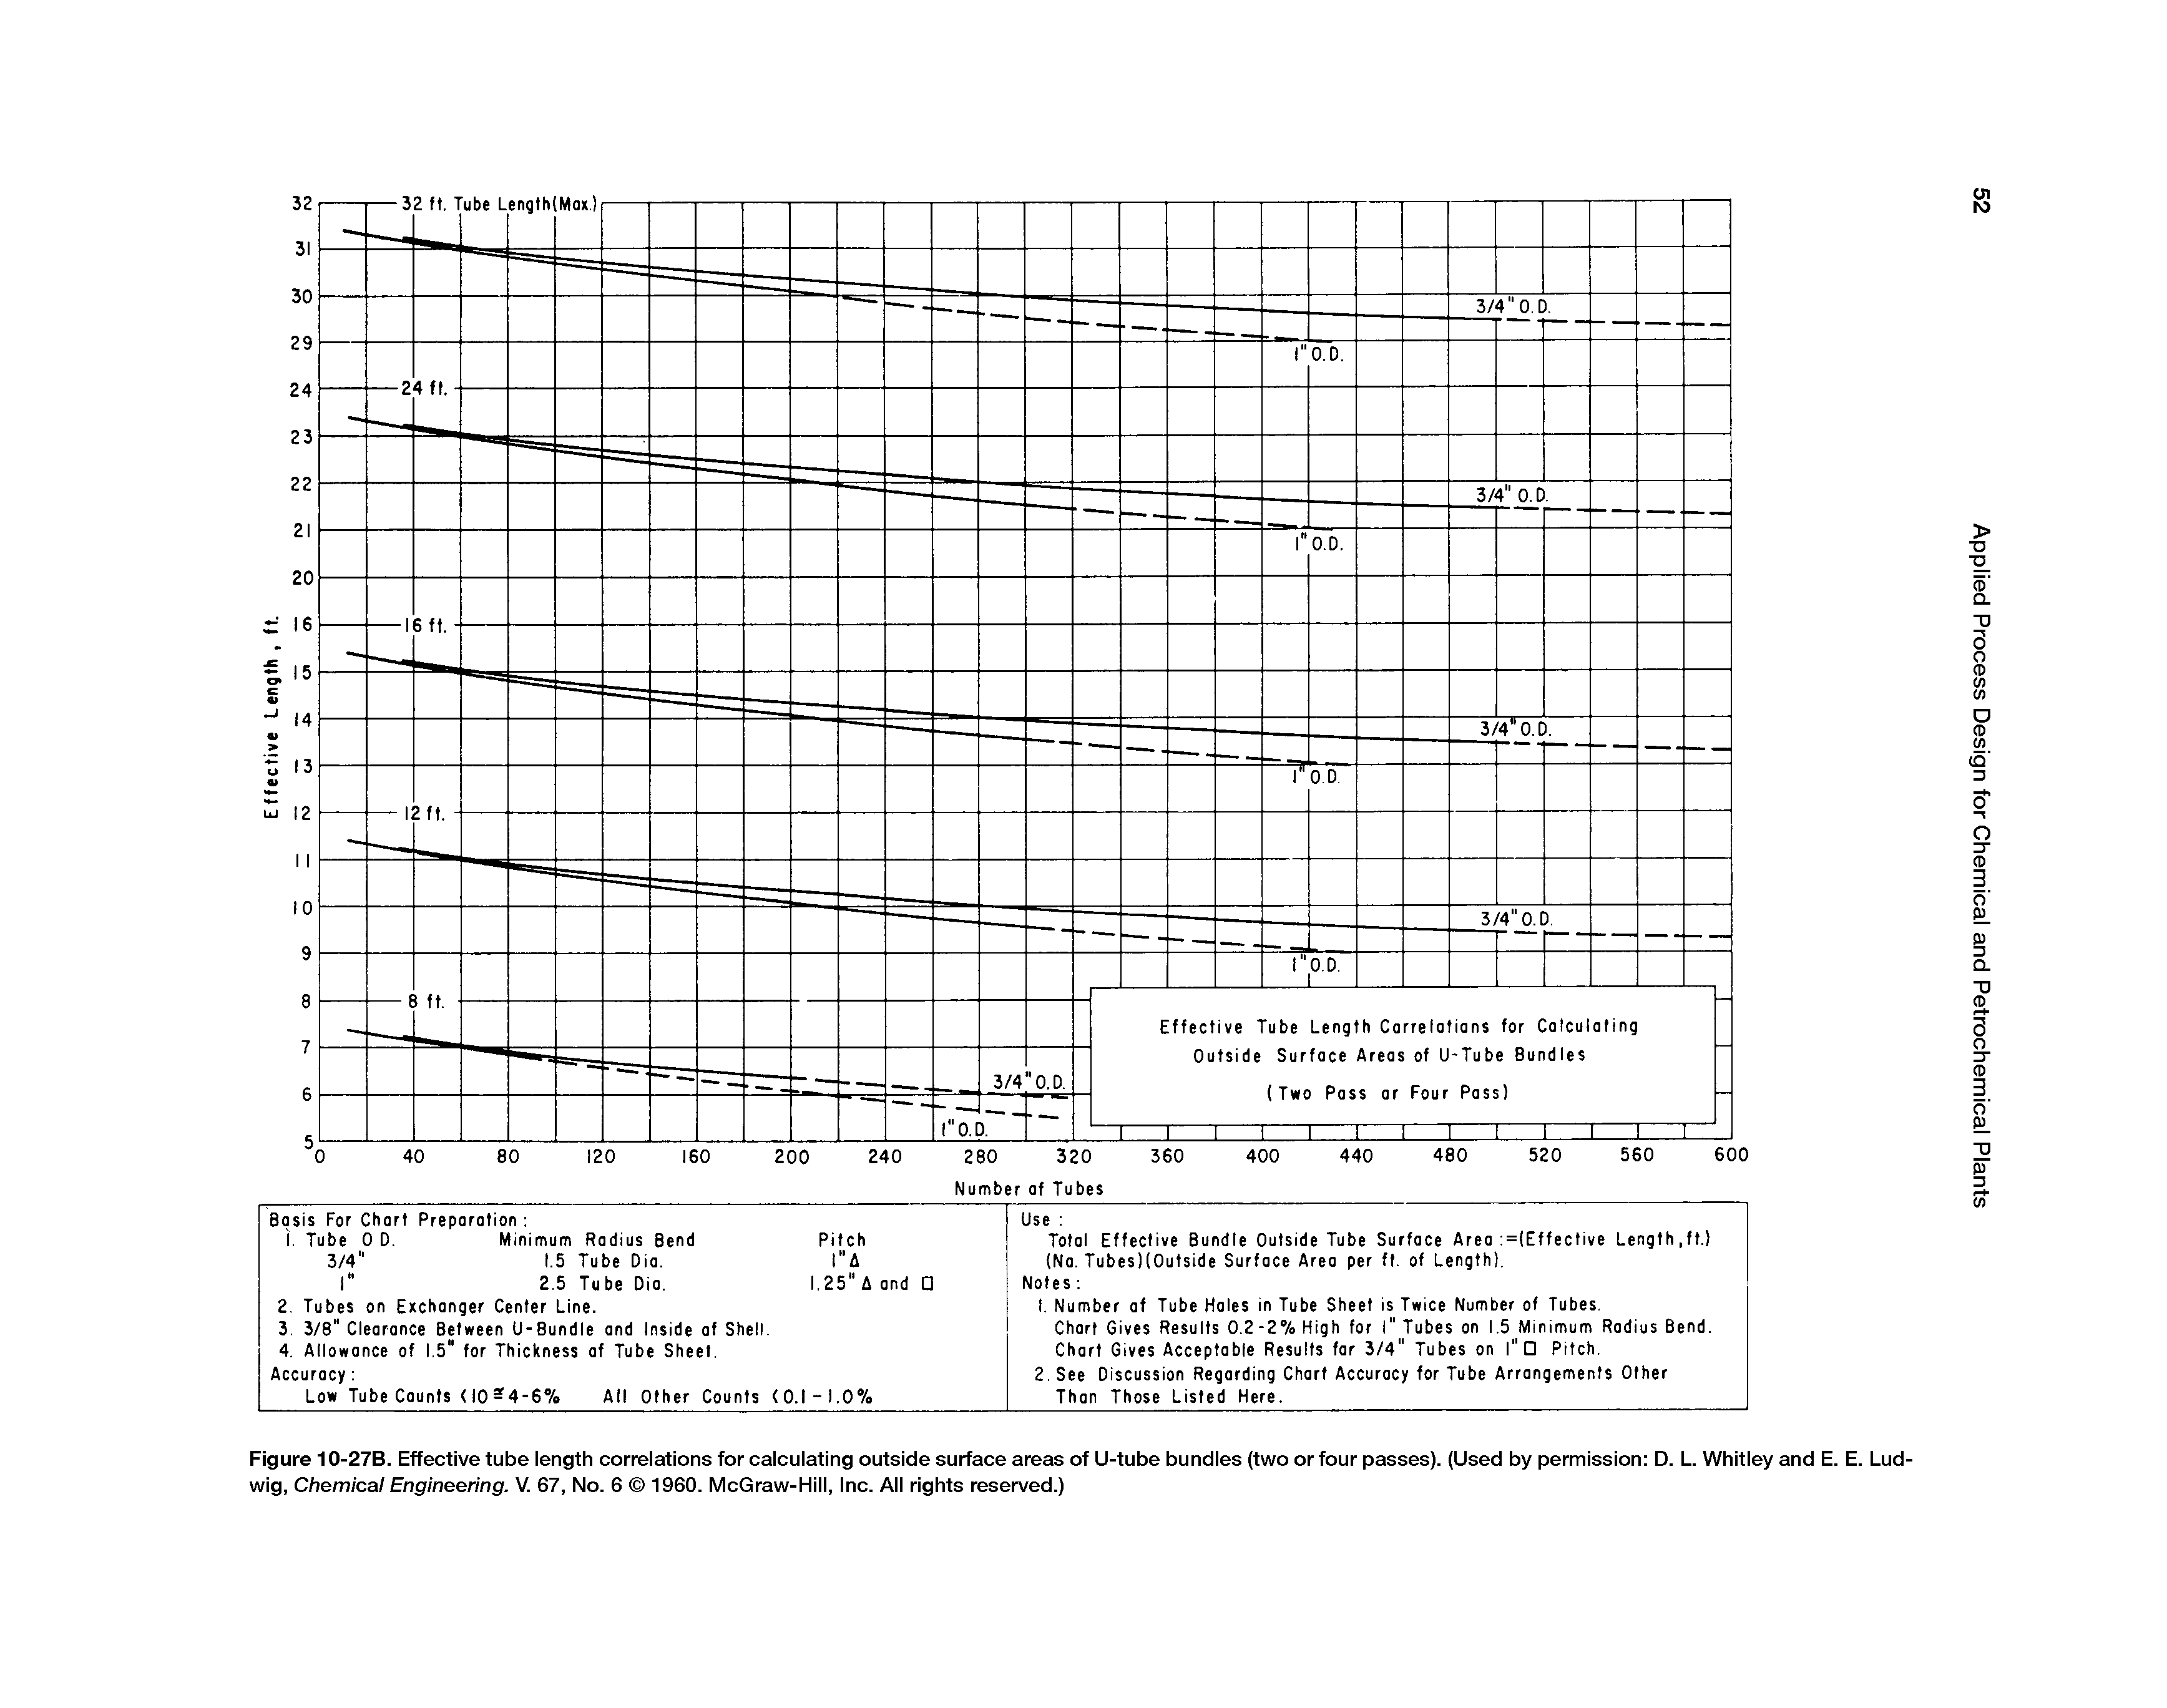 Figure 10-27B. Effective tube length correlations for calculating outside surface areas of U-tube bundles (two or four passes). (Used by permission D. L Whitley and E. E. Ludwig, Chemical Engineering. V. 67, No. 6 1960. McGraw-Hill, Inc. All rights reserved.)...